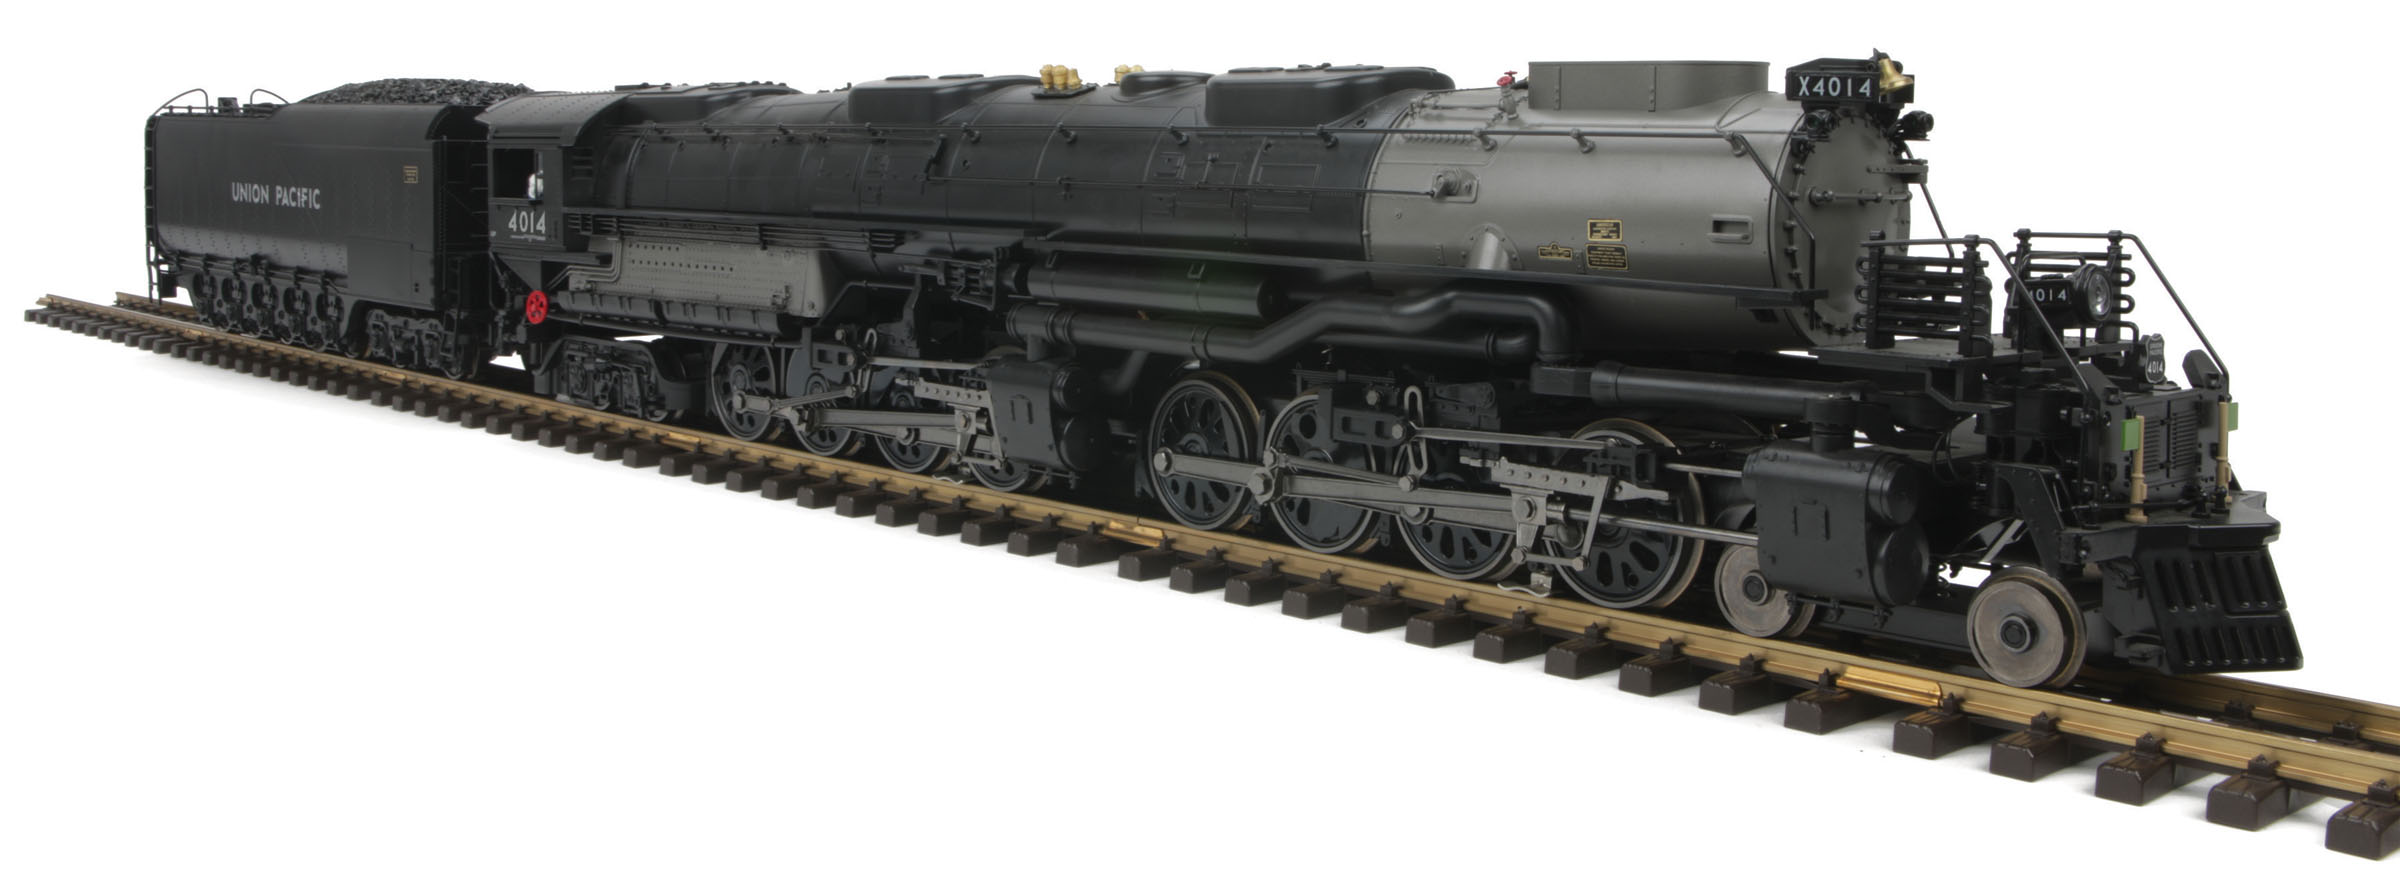 g scale engines